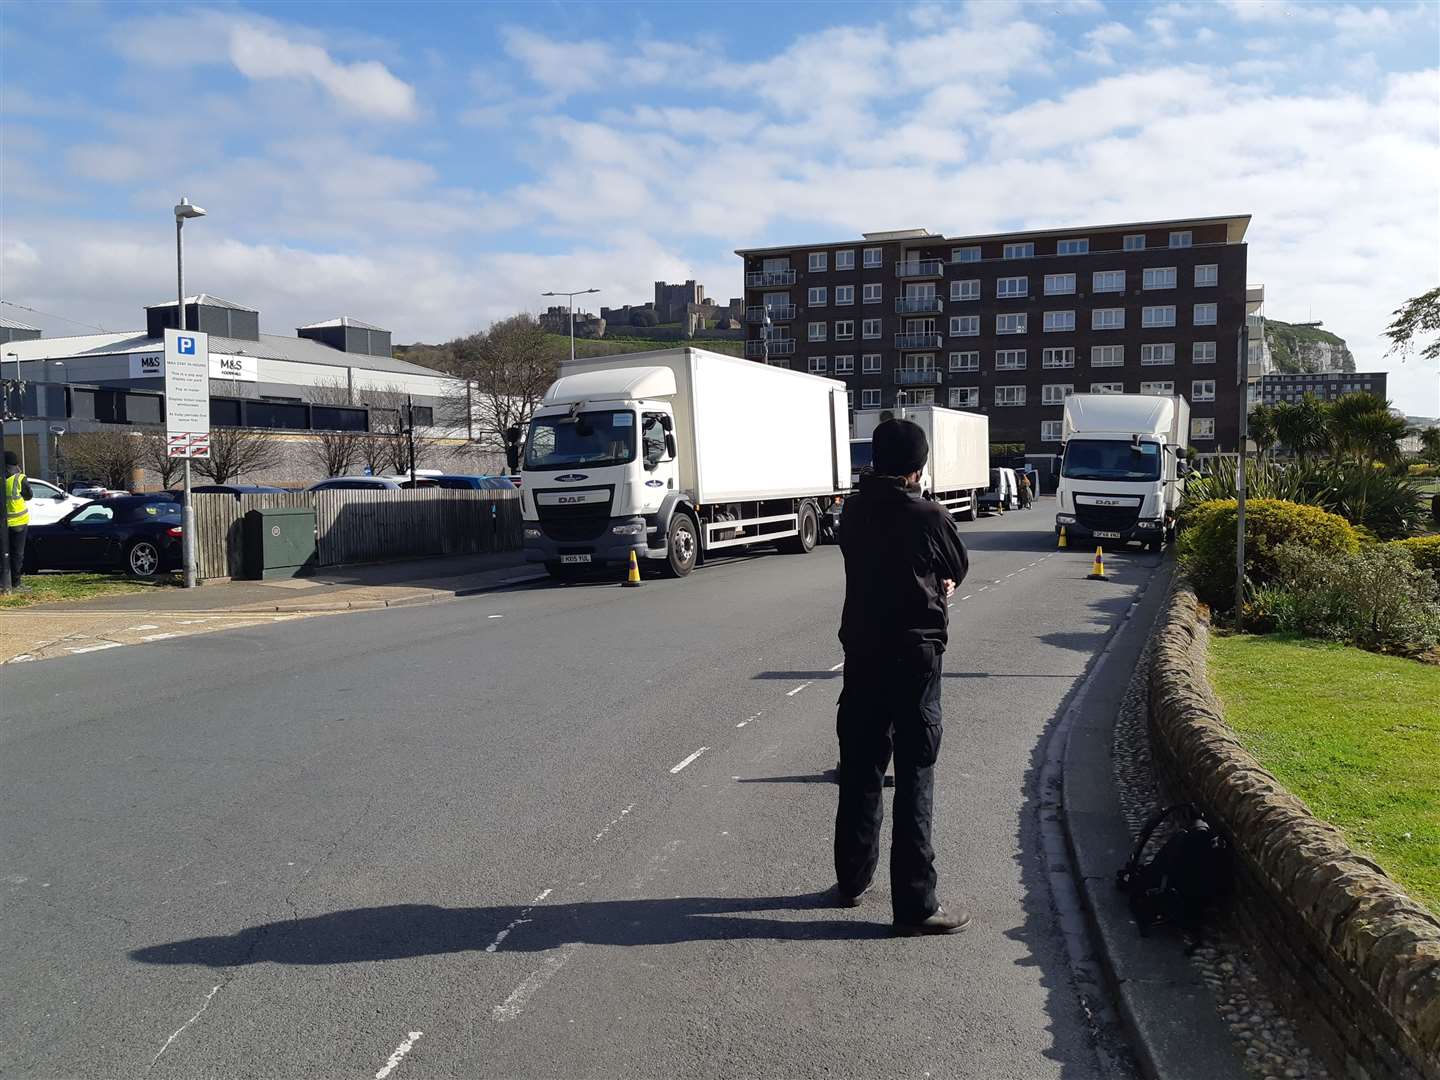 A security guard keeps watch at the location at Camden Crescent. Film crew lorries are also seen